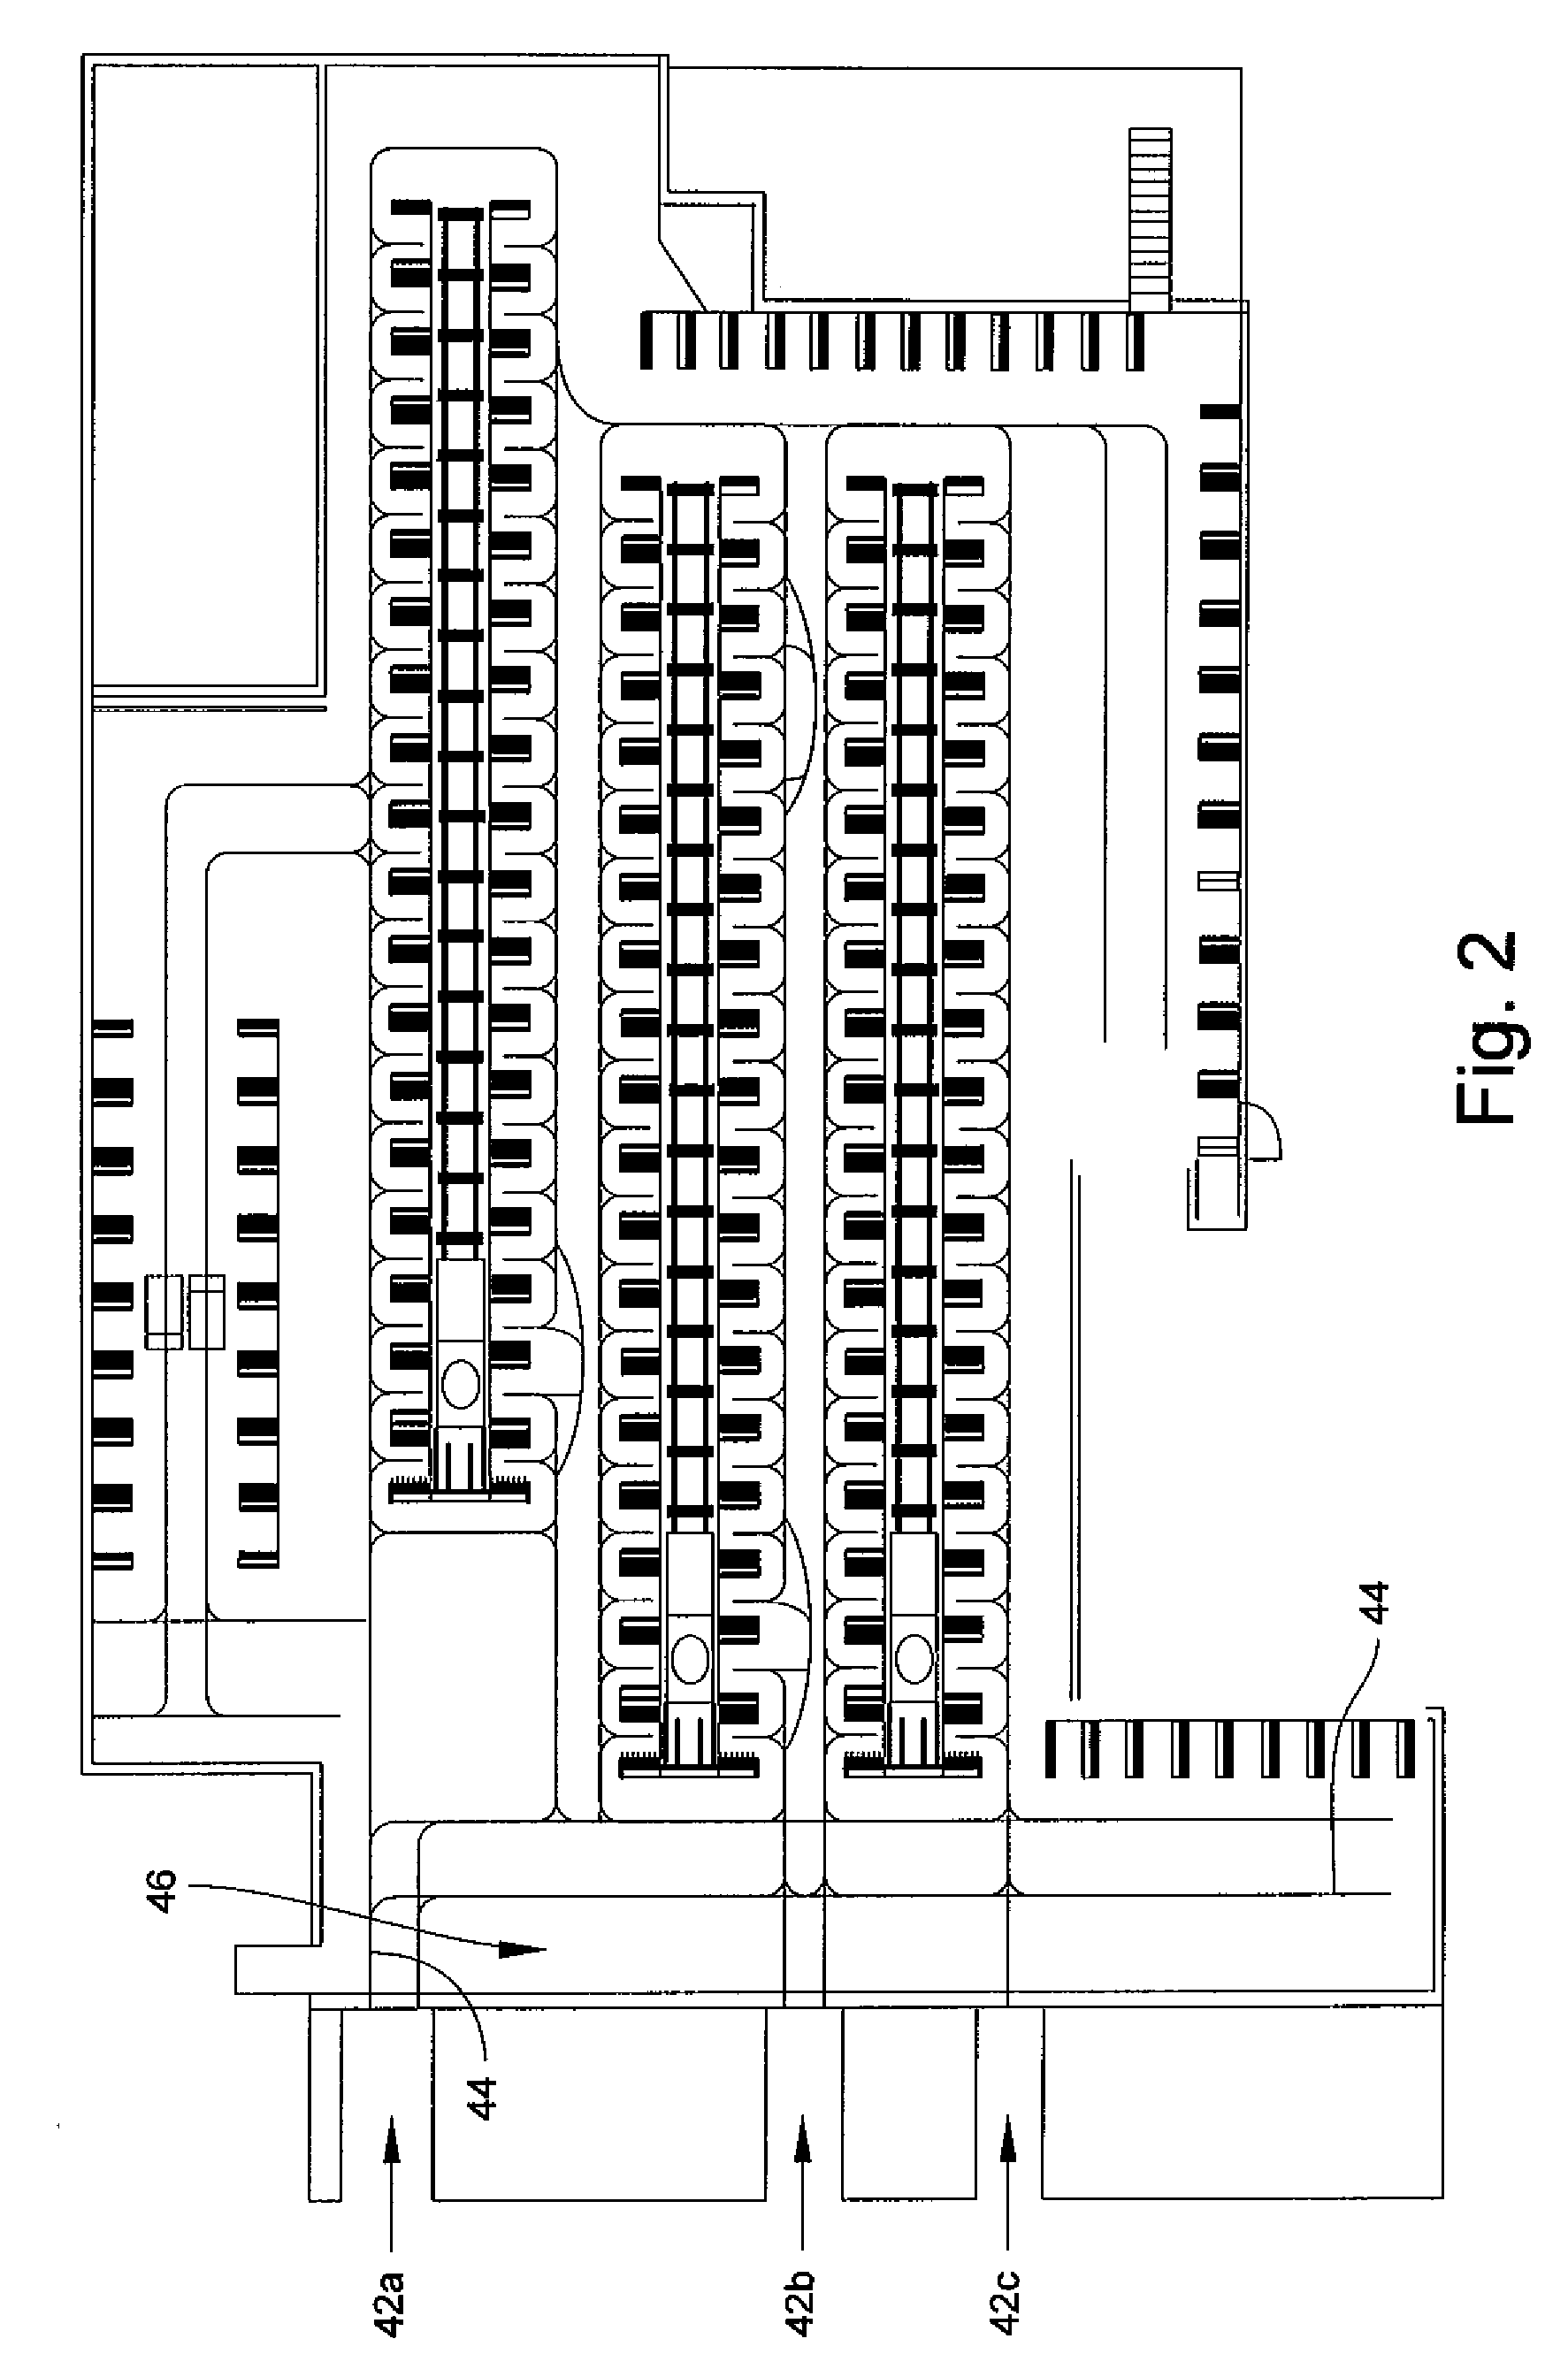 Automated cargo loading systems and methods